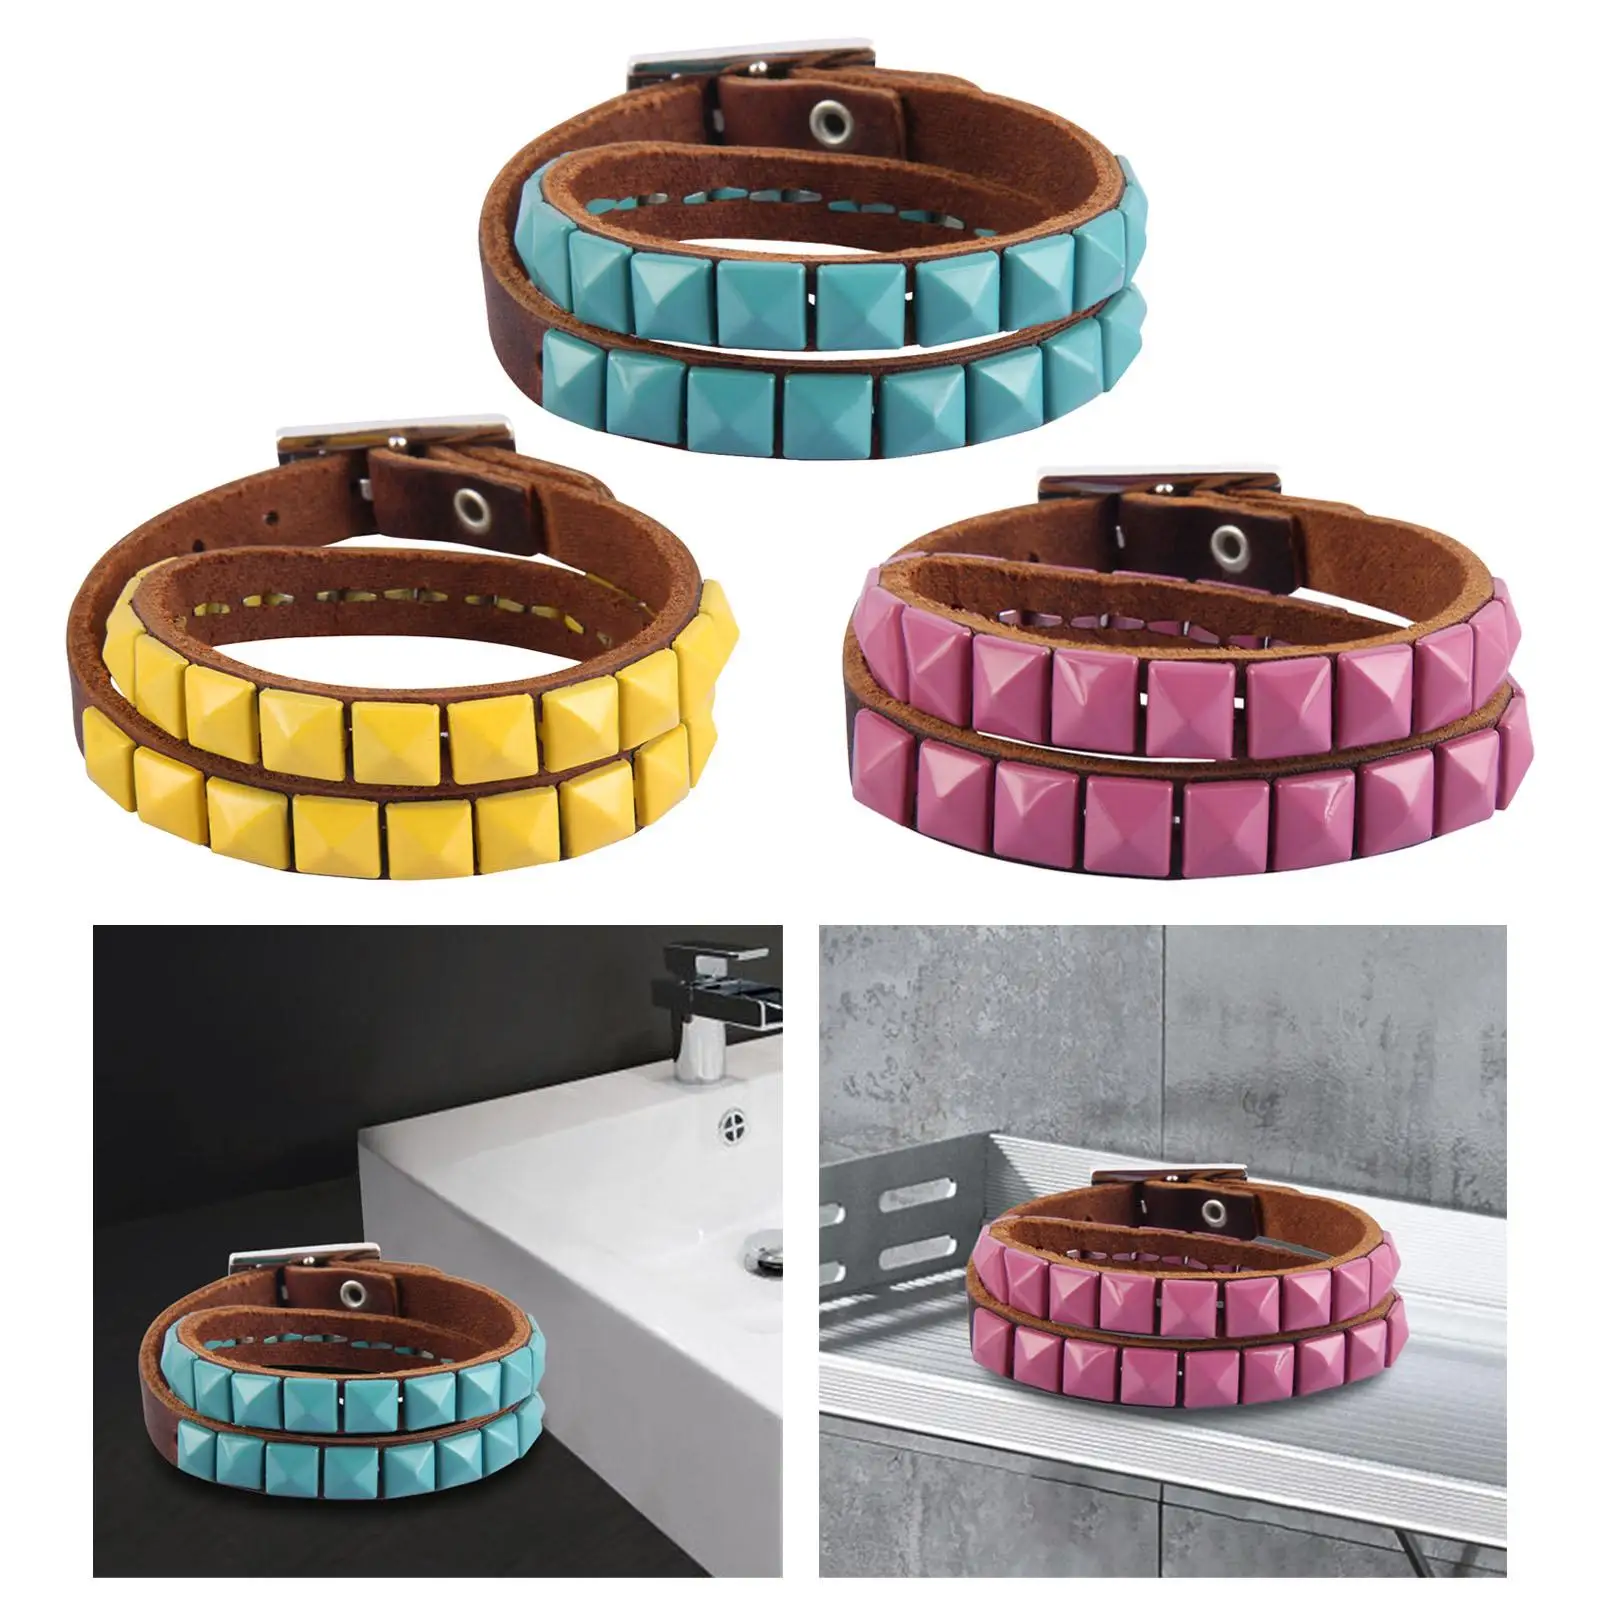 Punk Studded Bracelet Wide Thick Adjustable PU Leather Wristband Cuff Bangle for Men Women Party Favors Wedding Holiday Prom